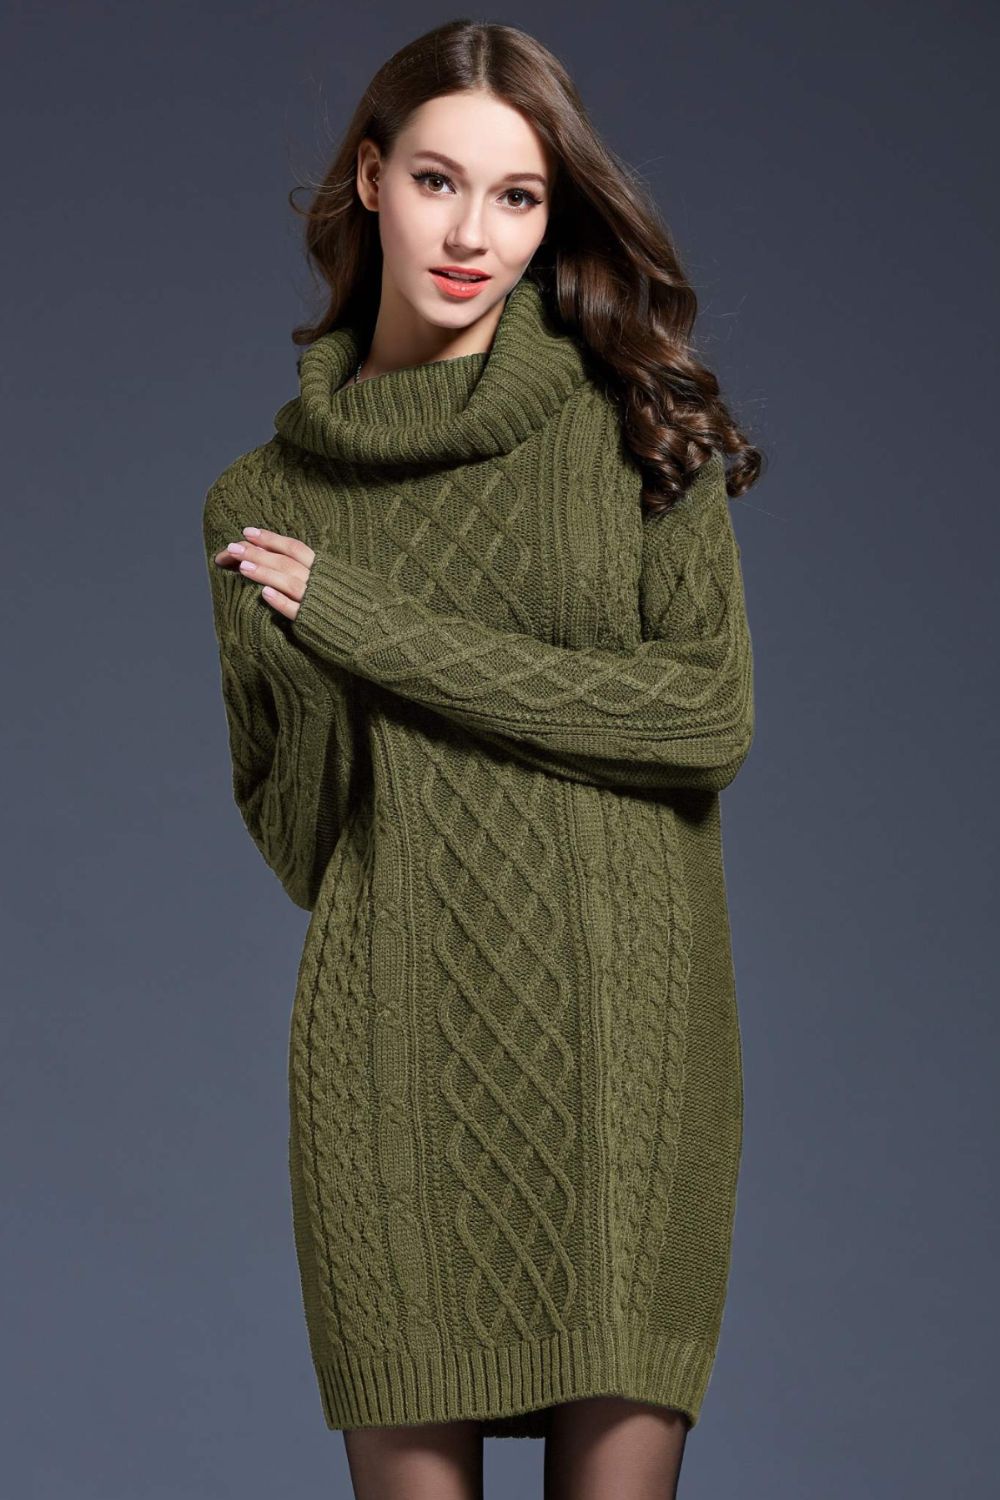 Women’s - Woven Right Full Size Mixed Knit Cowl Neck Dropped Shoulder Sweater Dress